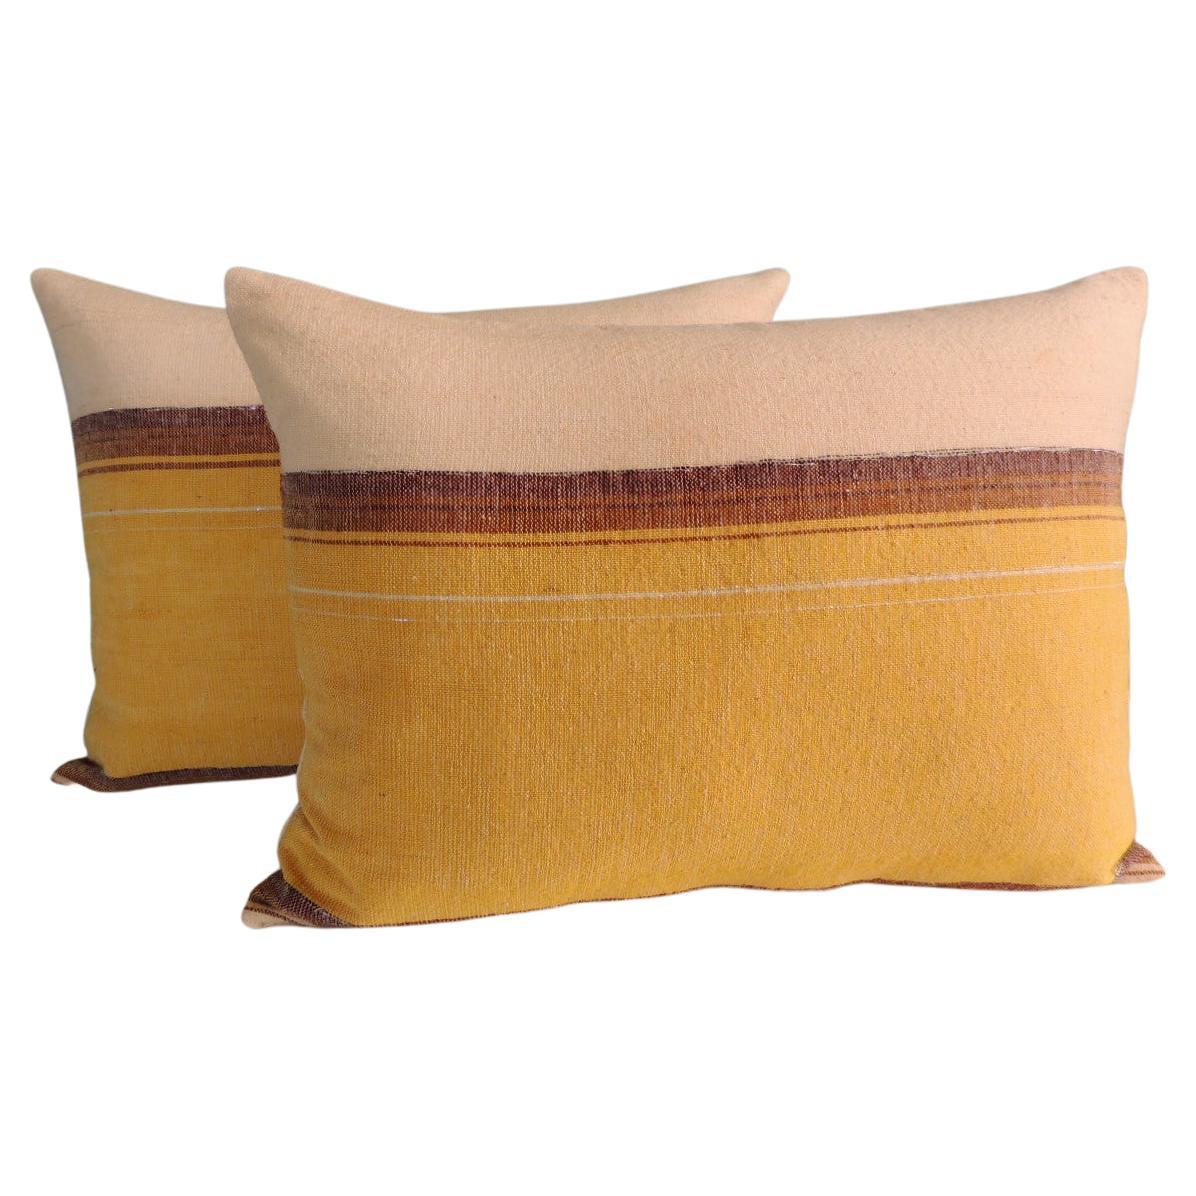 Vintage Woven Yellow and Brown Stripe Pattern Decorative Bolster Pillows